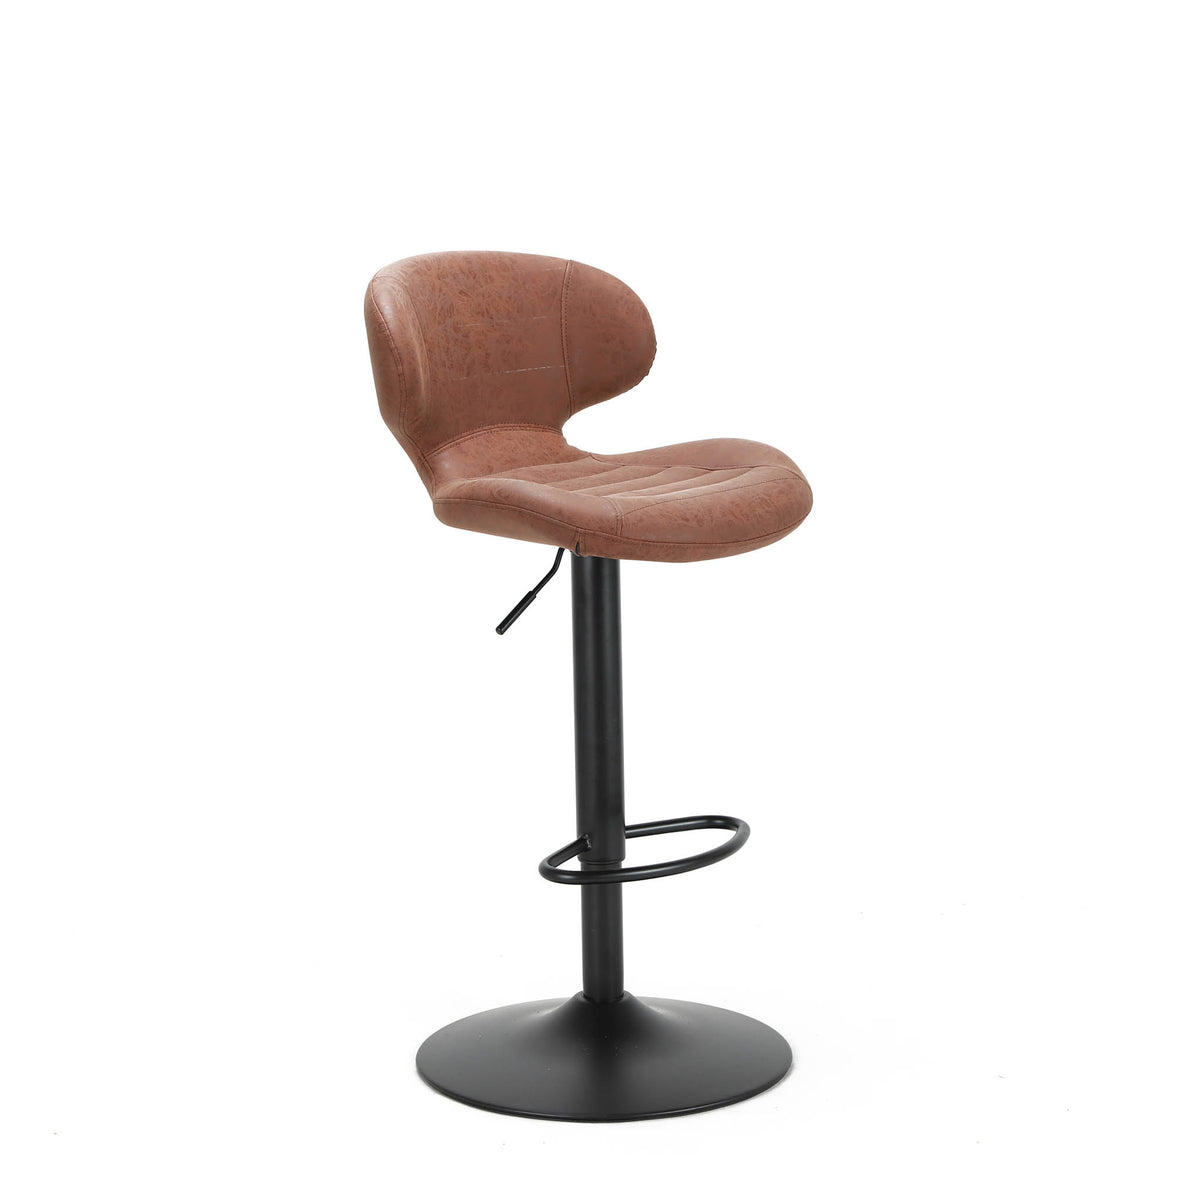 Mendez Tan Faux Leather Kitchen Breakfast Bar Stool from Roseland Furniture